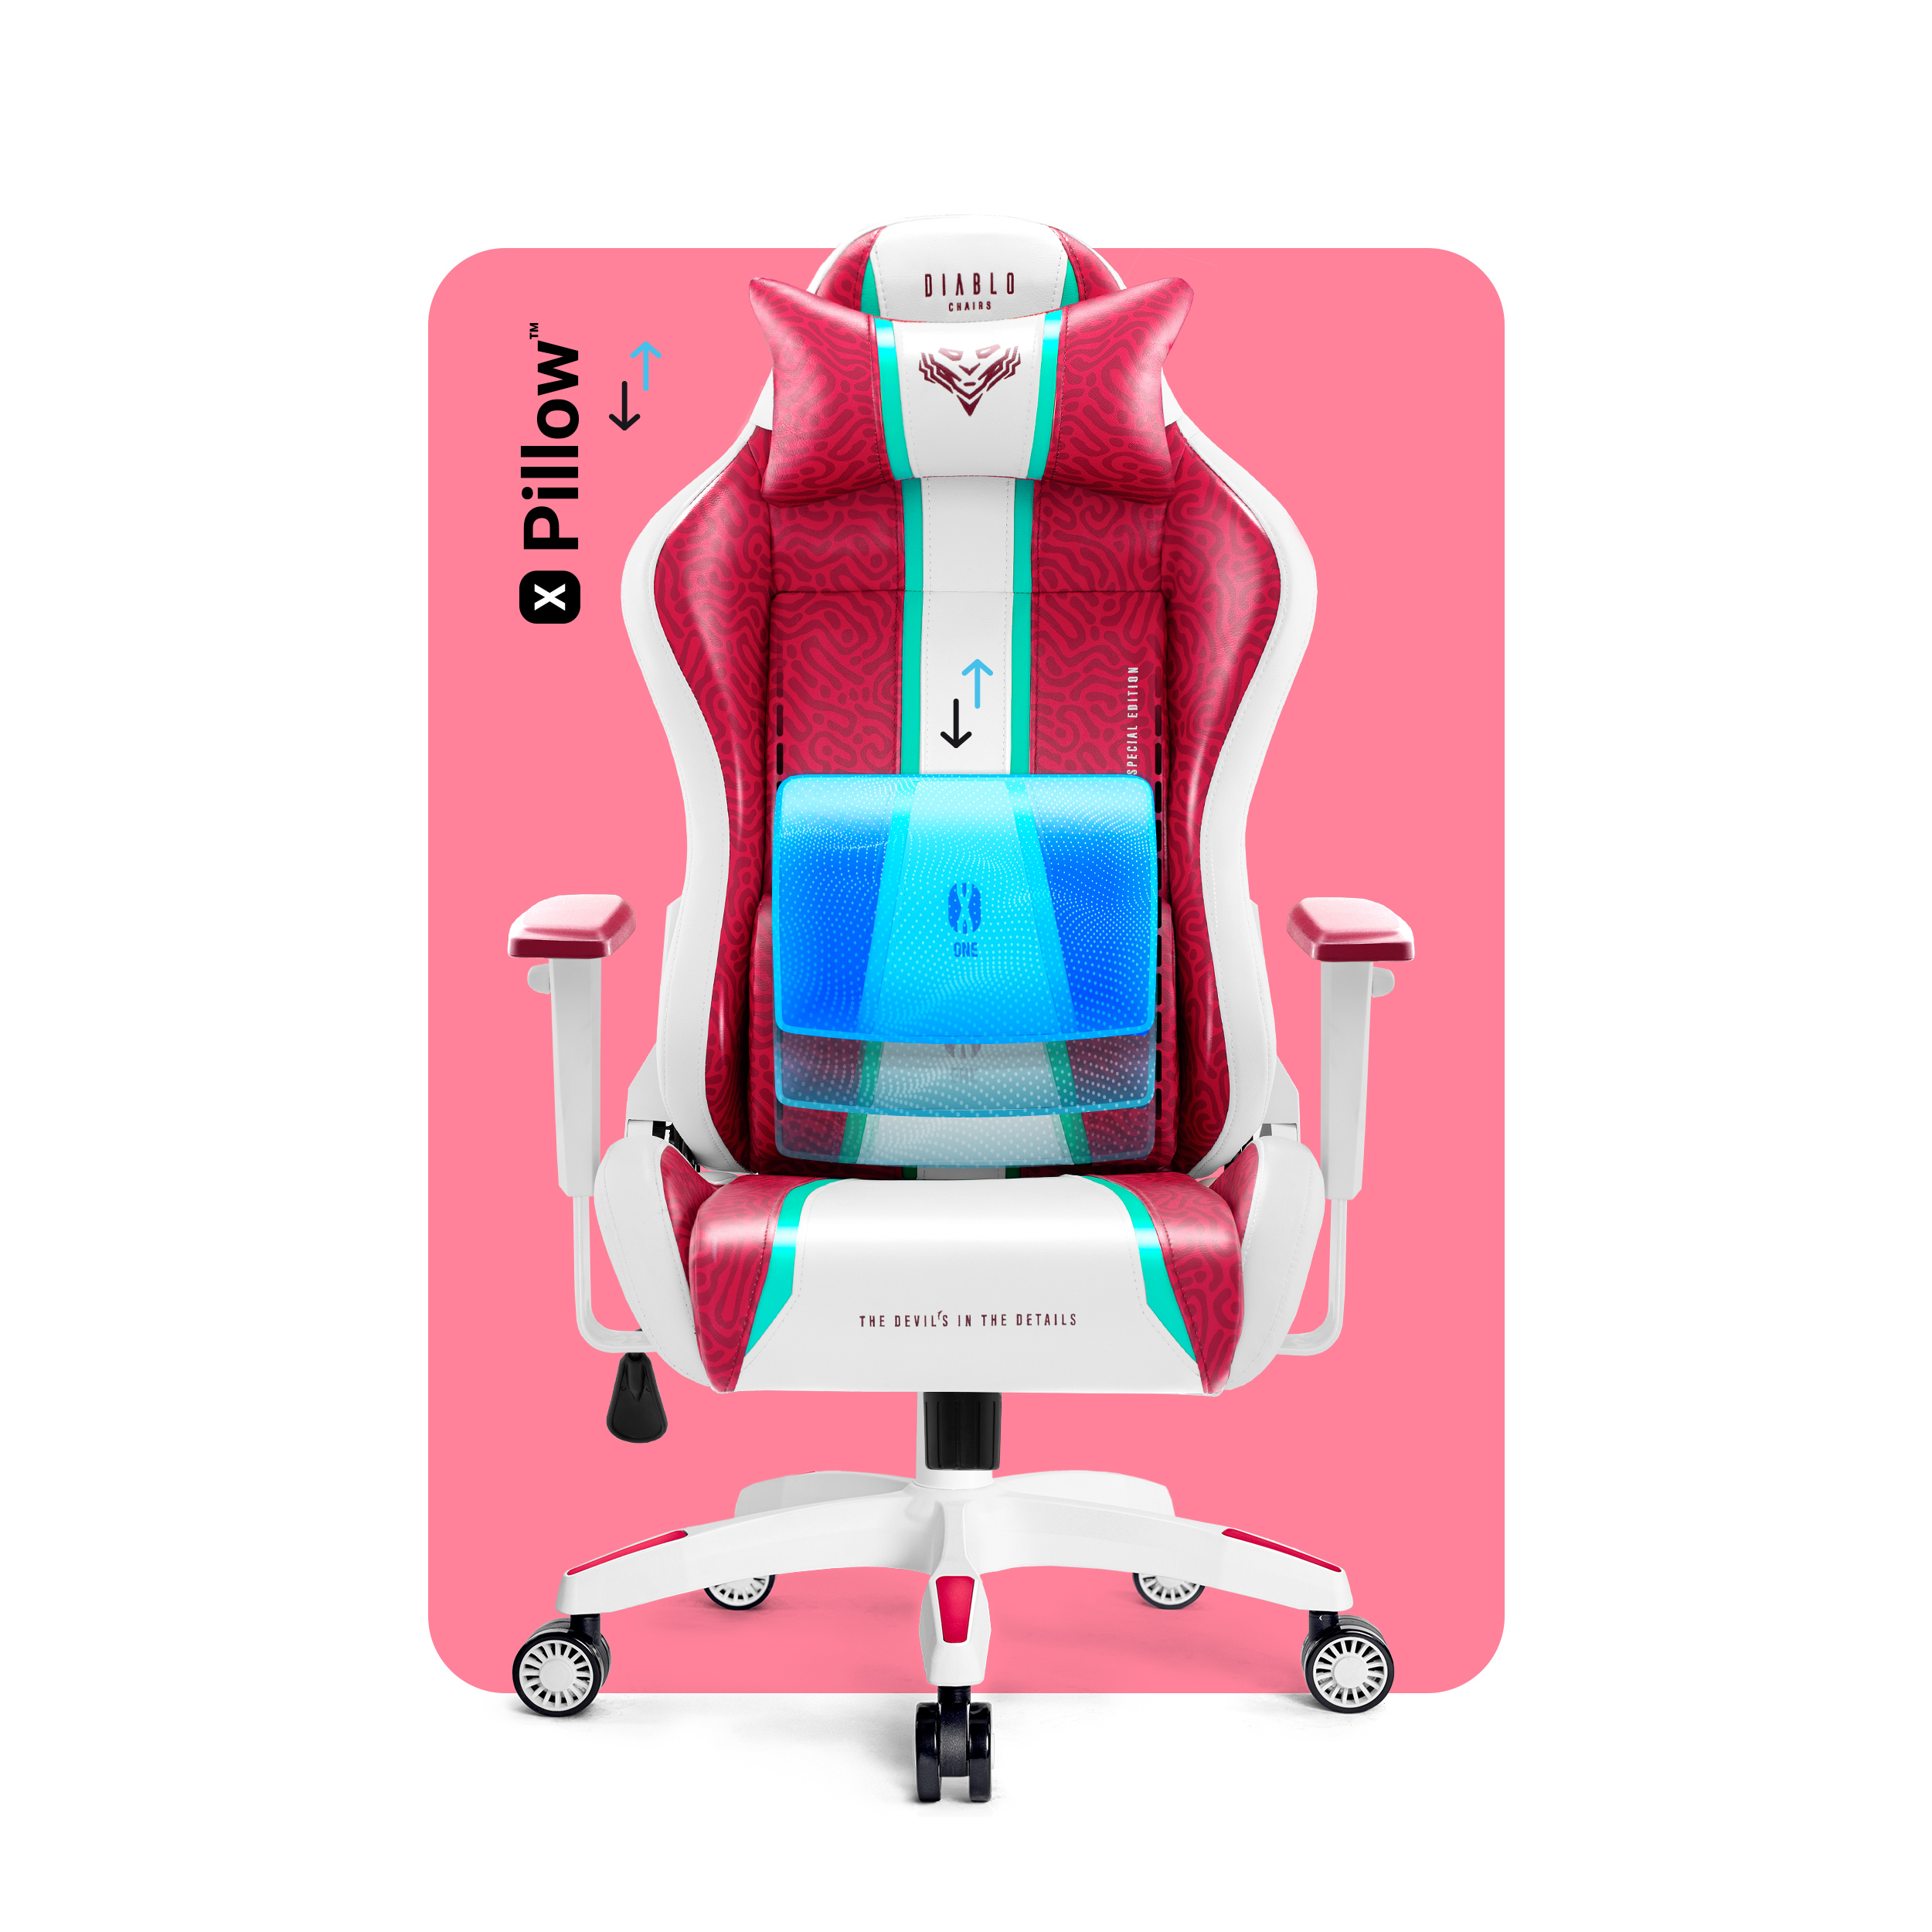 CANDY 2.0 DIABLO X-ONE NORMAL CHAIRS Stuhl, Gaming Rosa